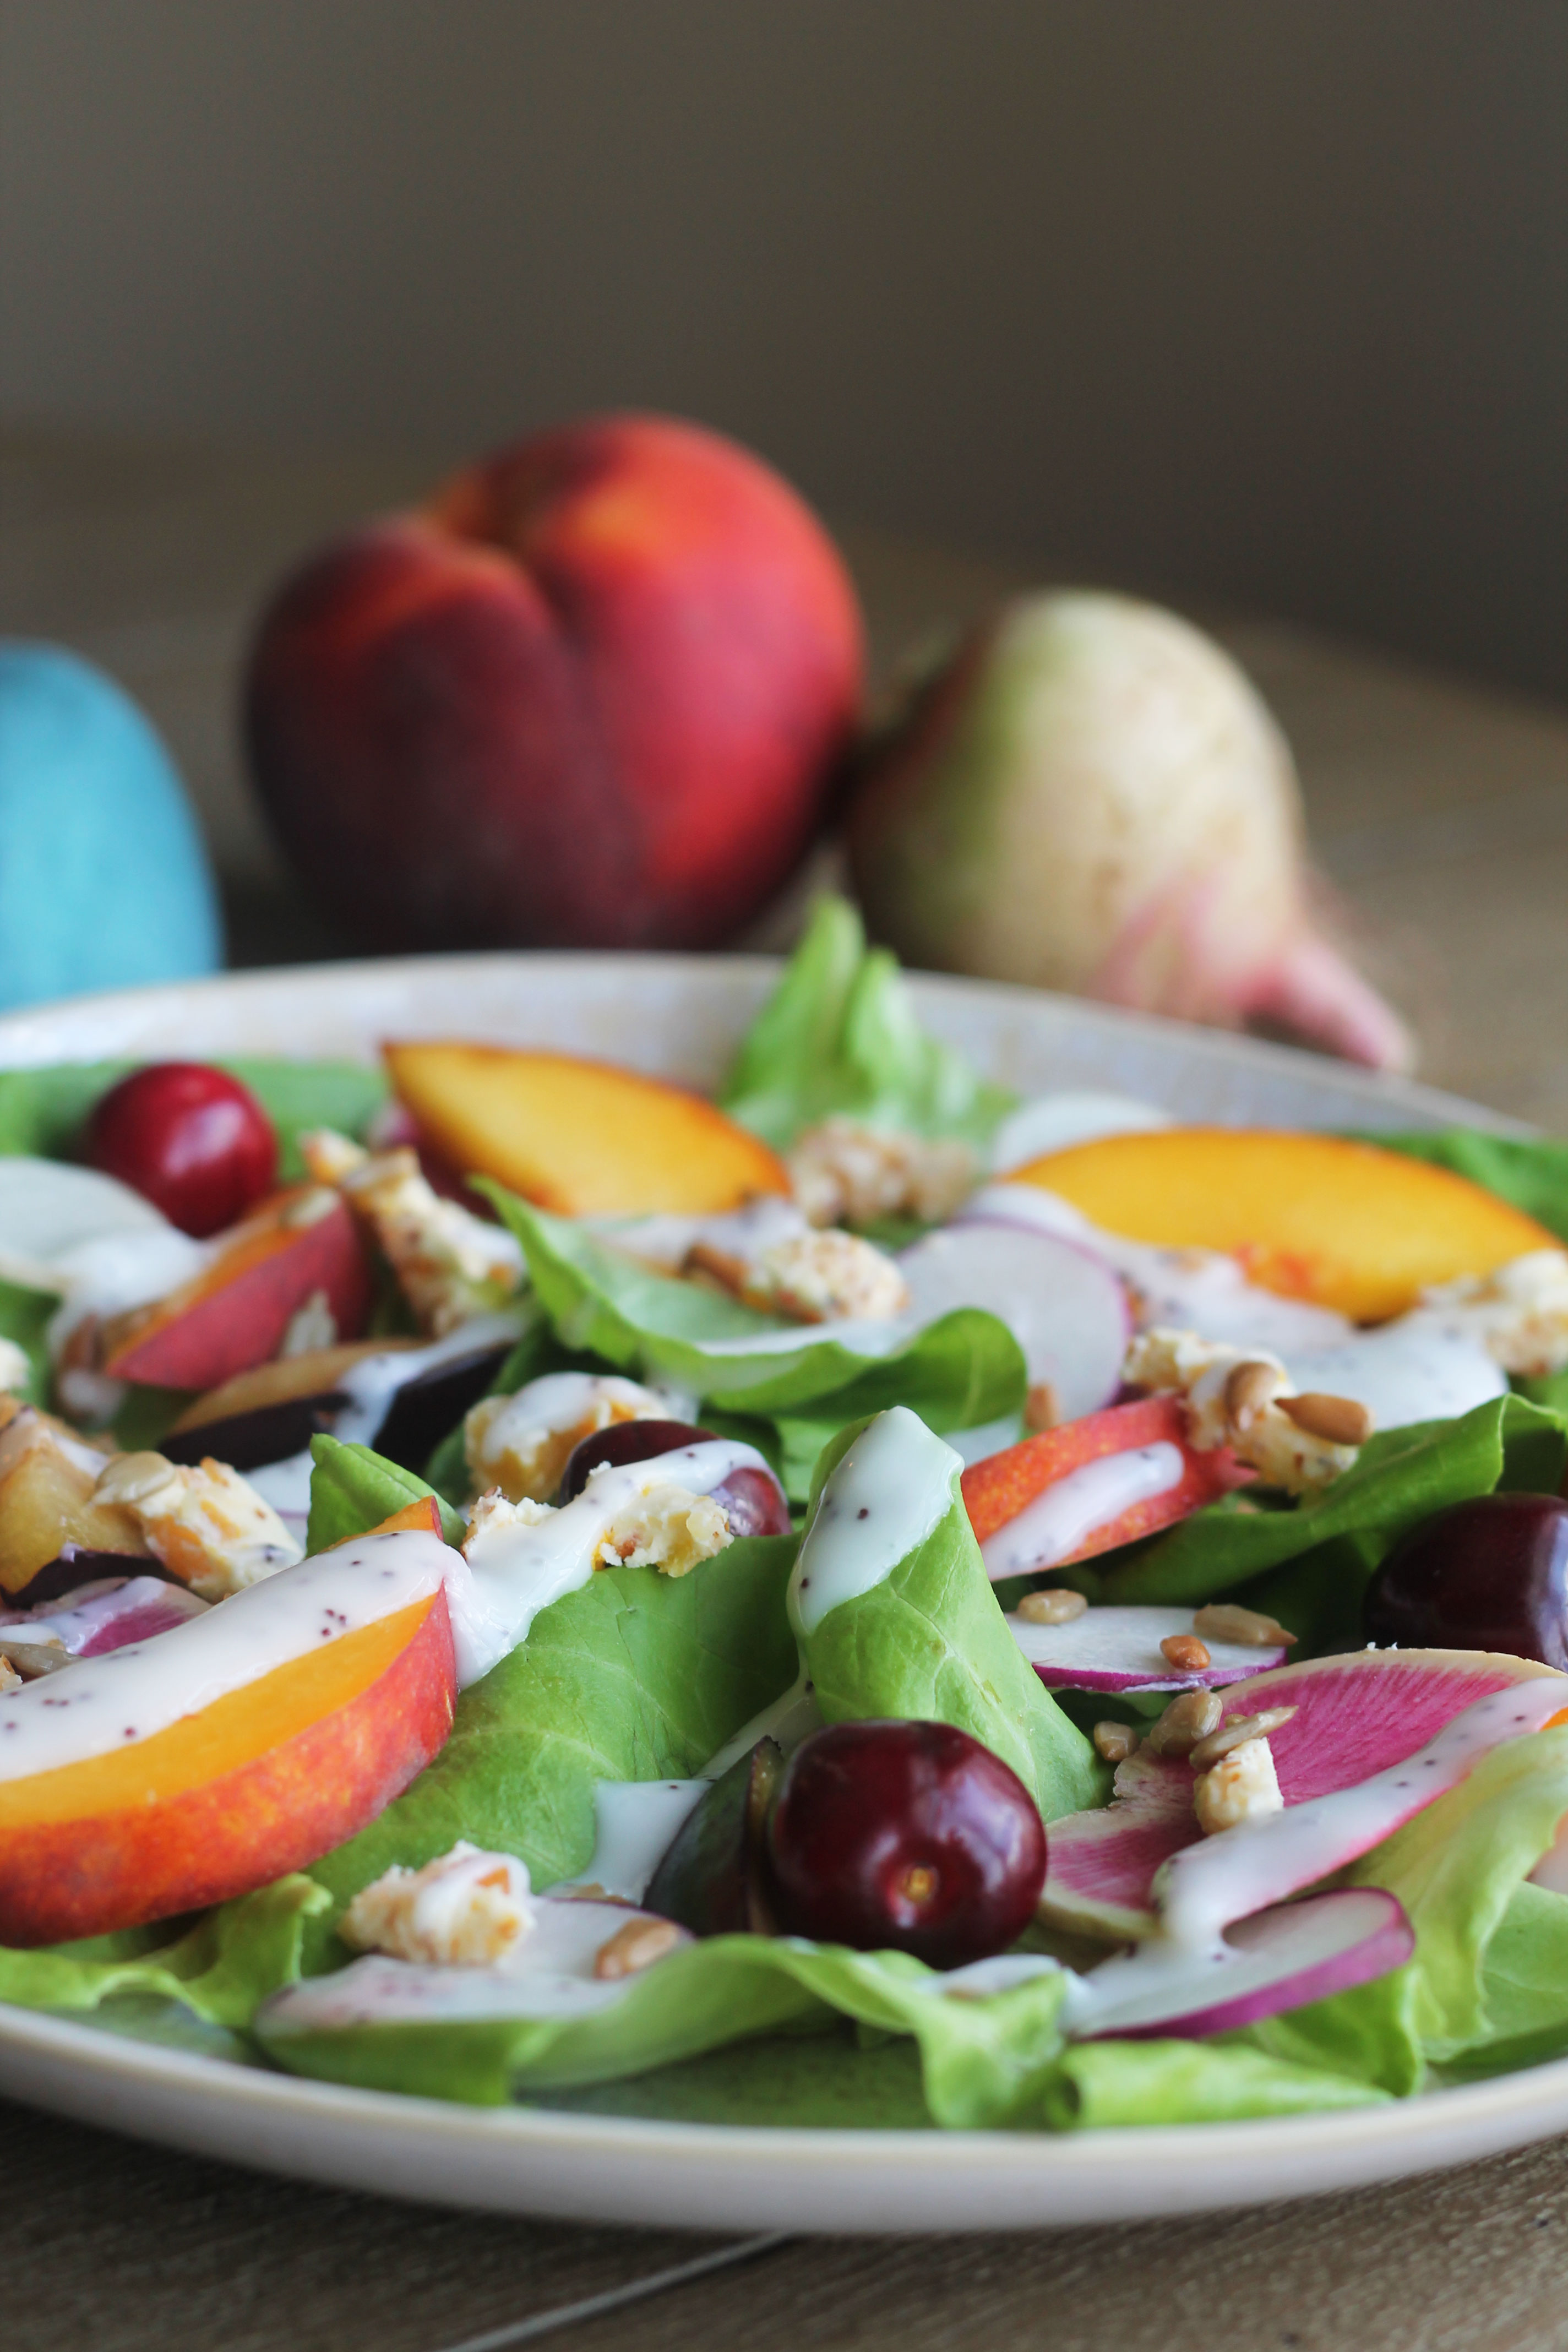 I can't get enough stone fruit and radishes right now so this summer salad is the perfect combo